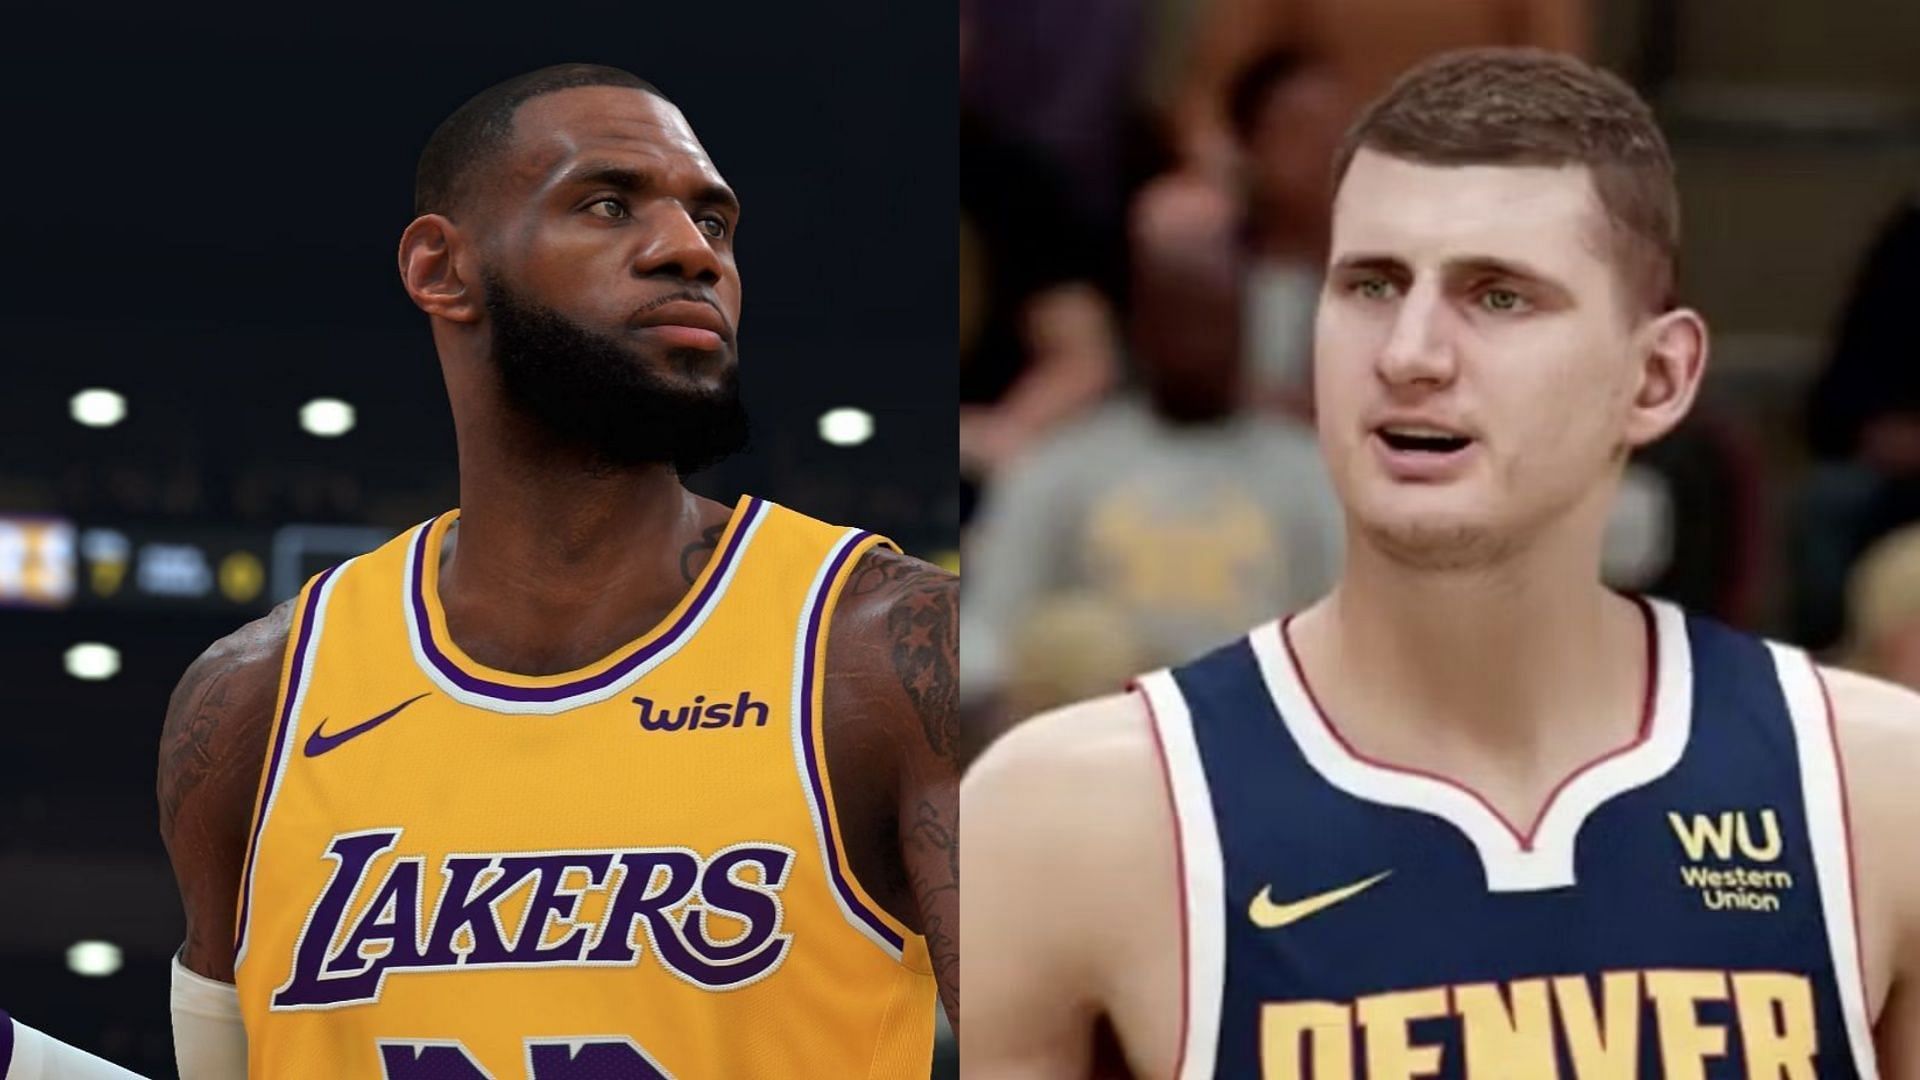 Both Lebron James and Nikola Jokic are firm favorites to become NBA 2K24 cover athletes (Images via 2K Sports)